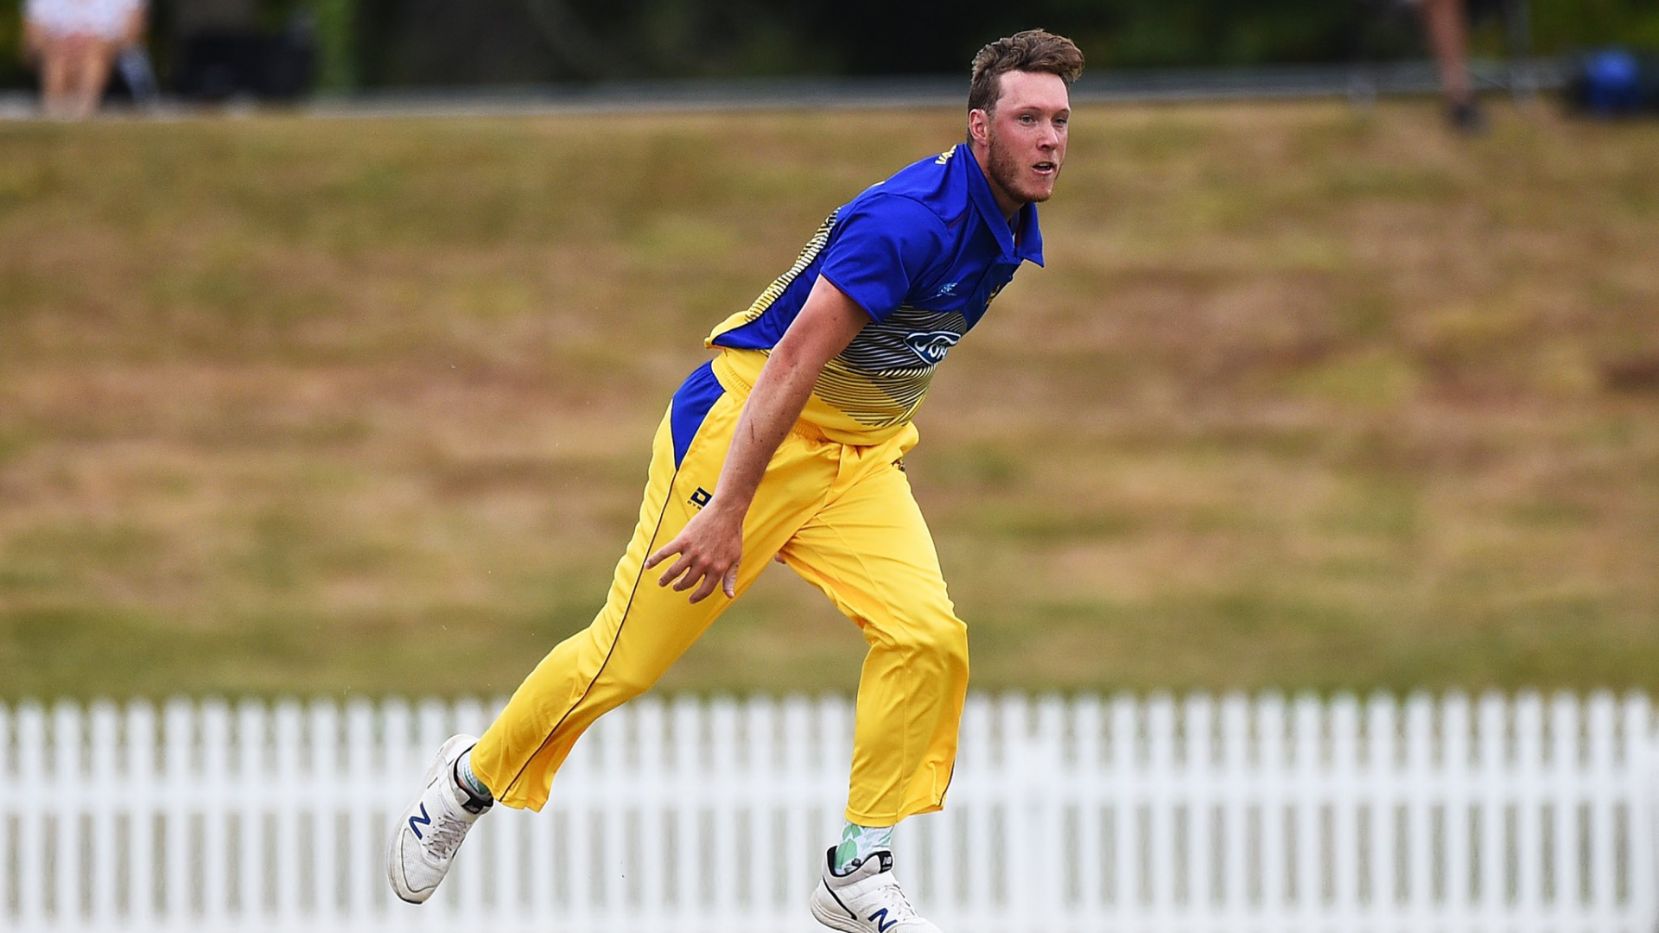 Ford Trophy | Bracewell’s all-round show pushes Wellington to the top, Bacon gives Otago their second win